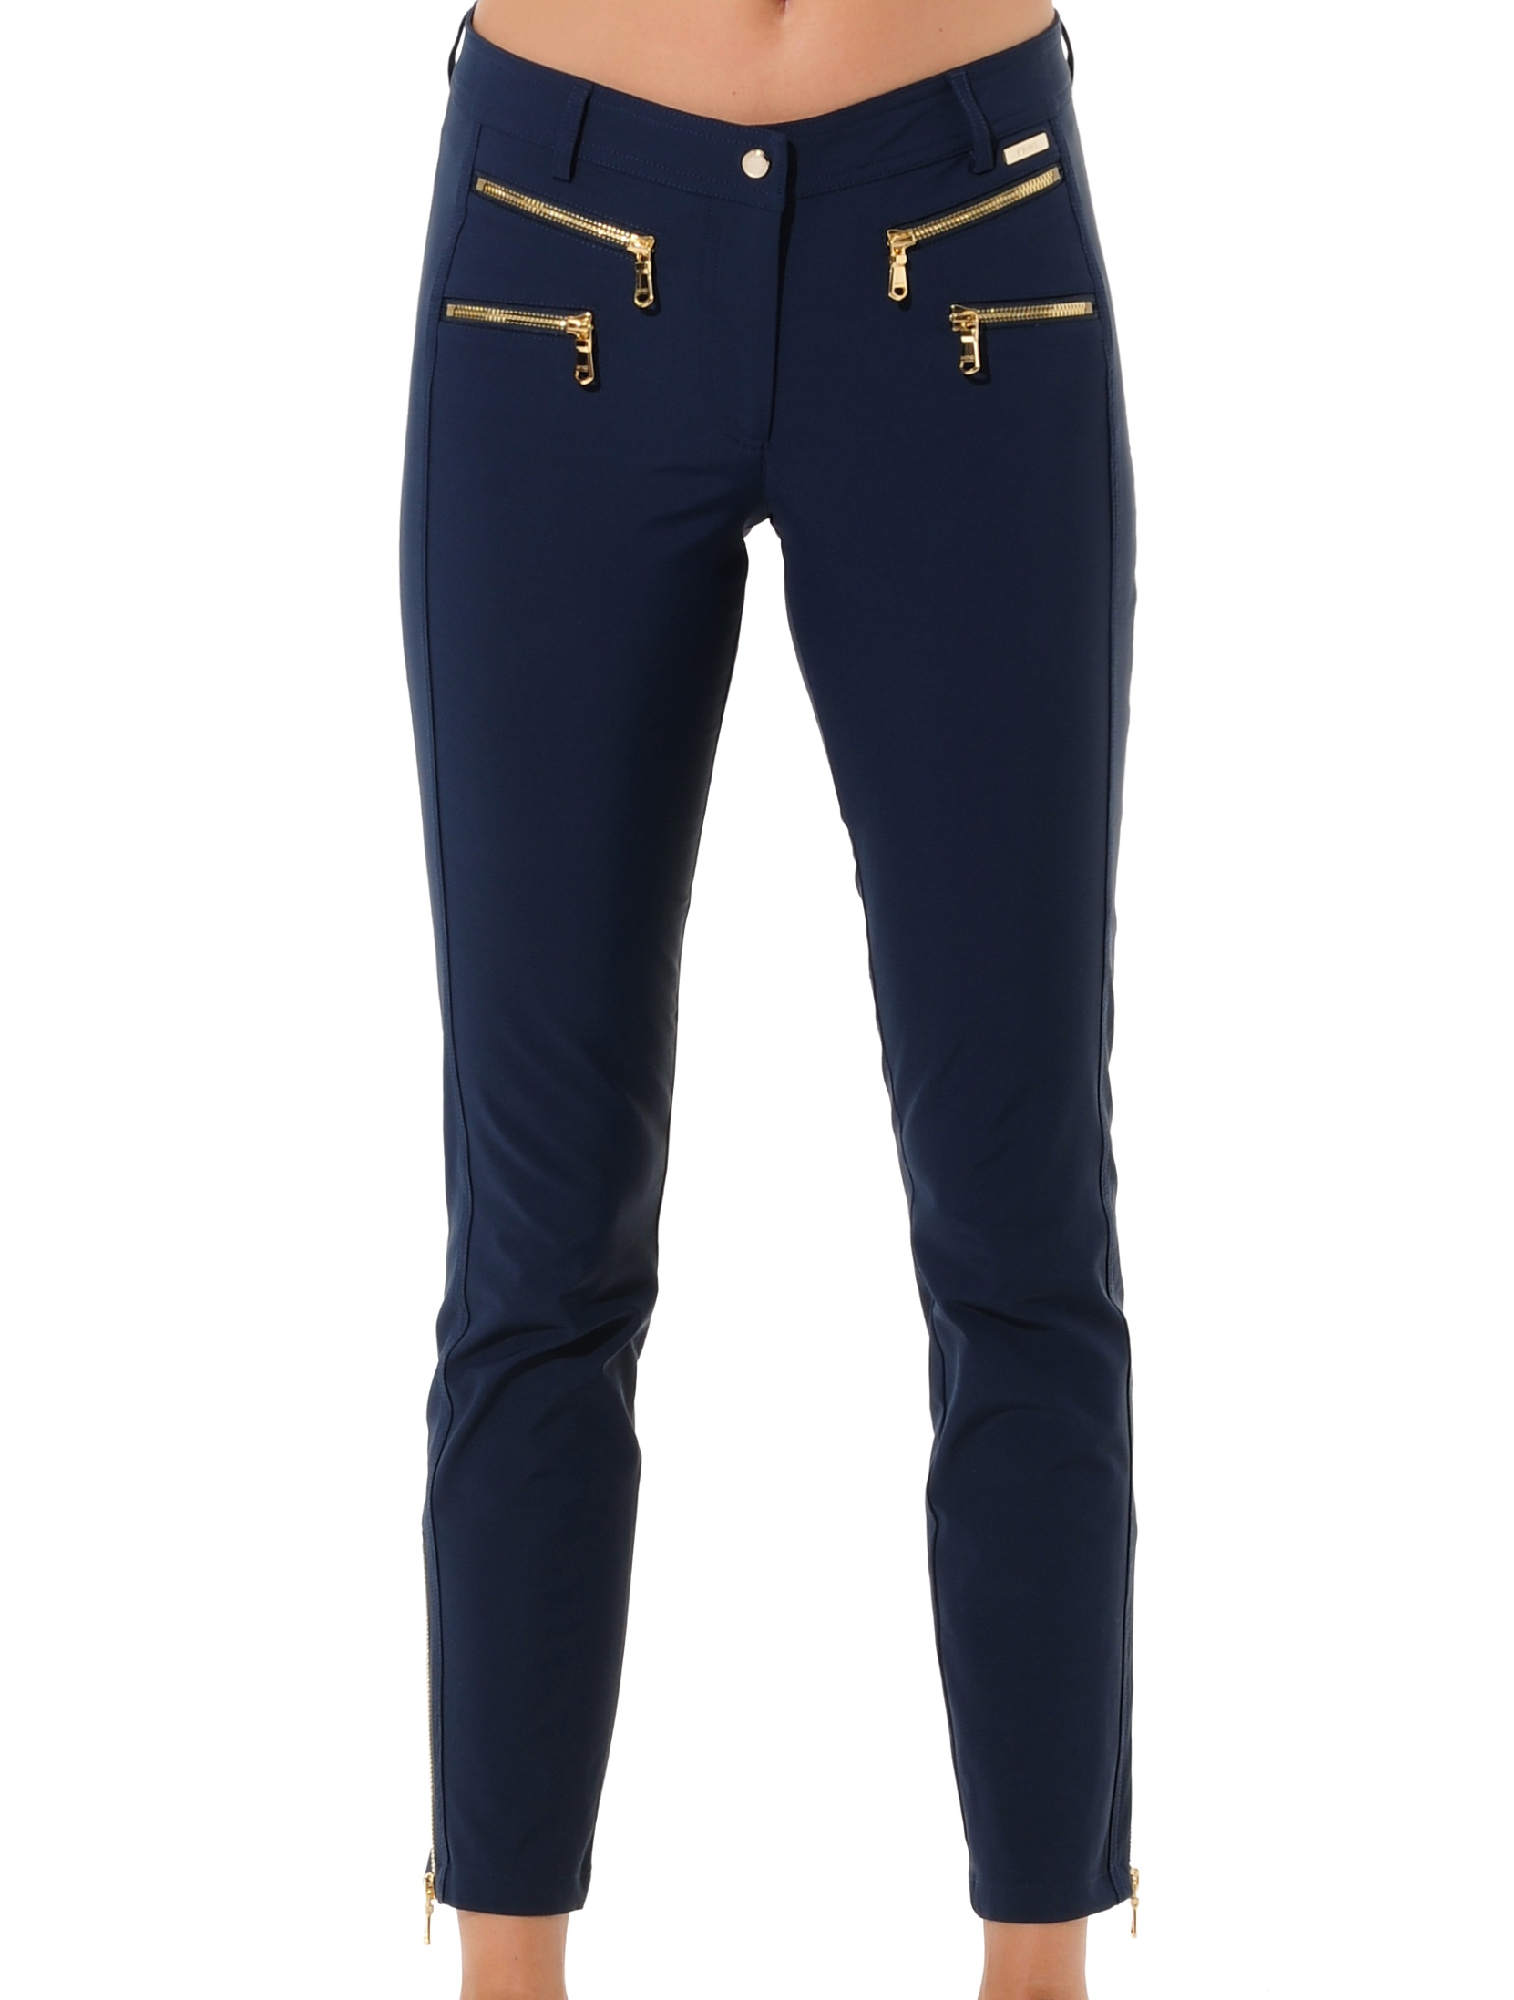 4way stretch shiny gold double zip ankle pants navy 